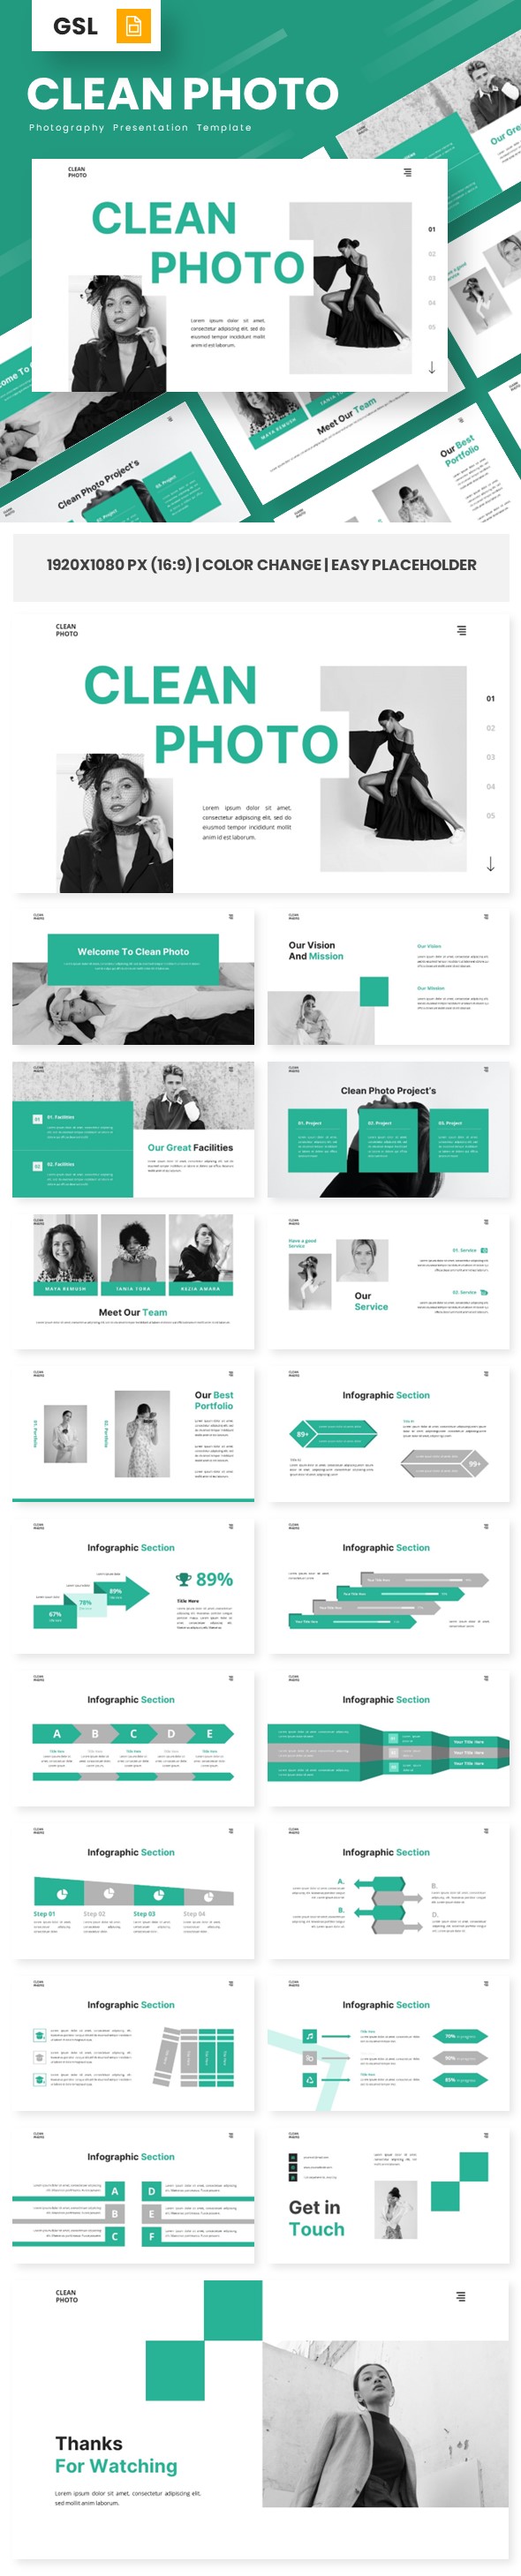 [DOWNLOAD]Clean Photo - Photography Google Slide Templates